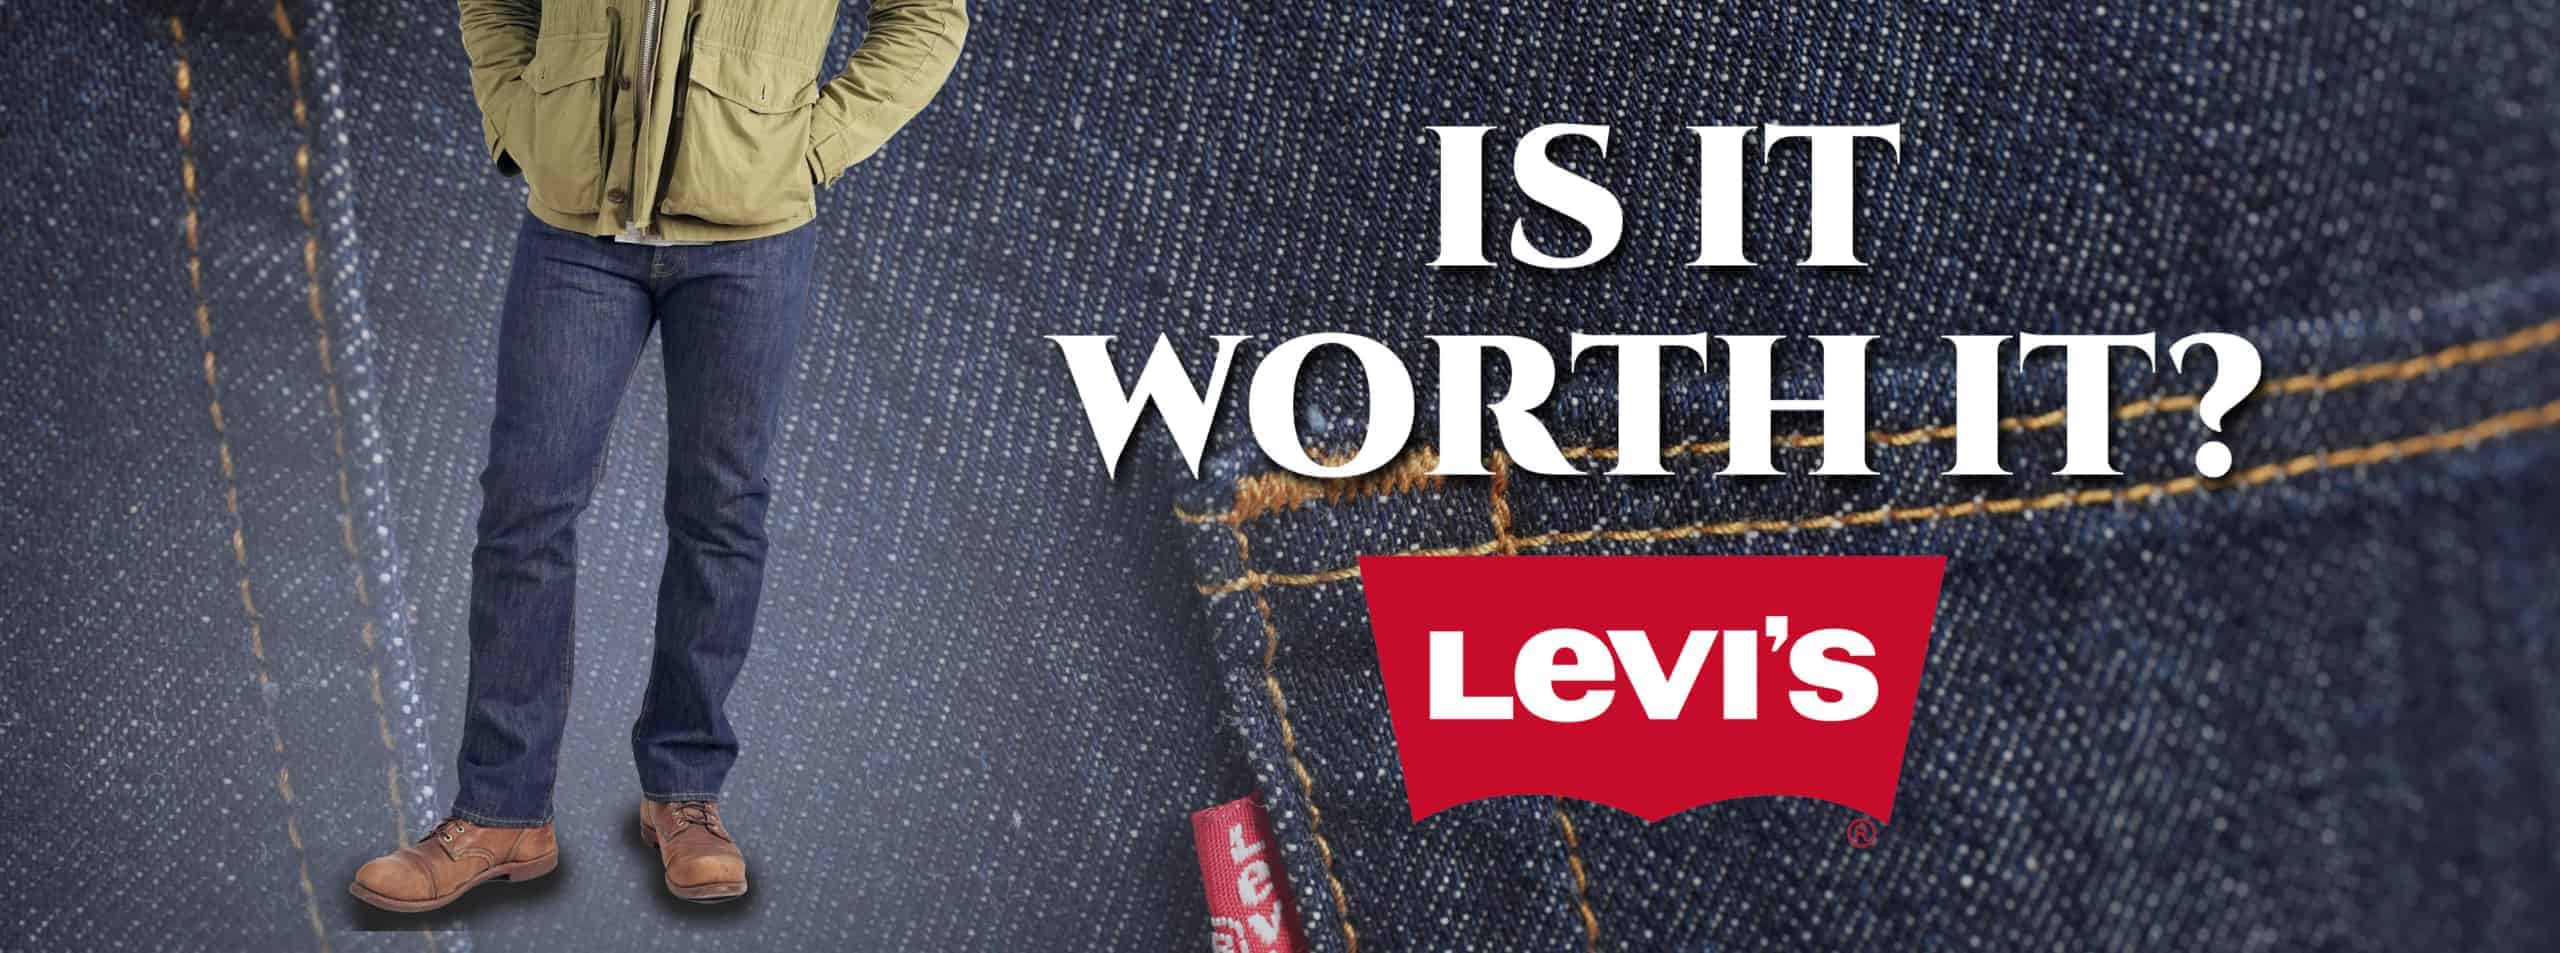 Gedehams Stavning beskæftigelse Levi's 501 Jeans: Are They Worth It? (In-Depth Review)